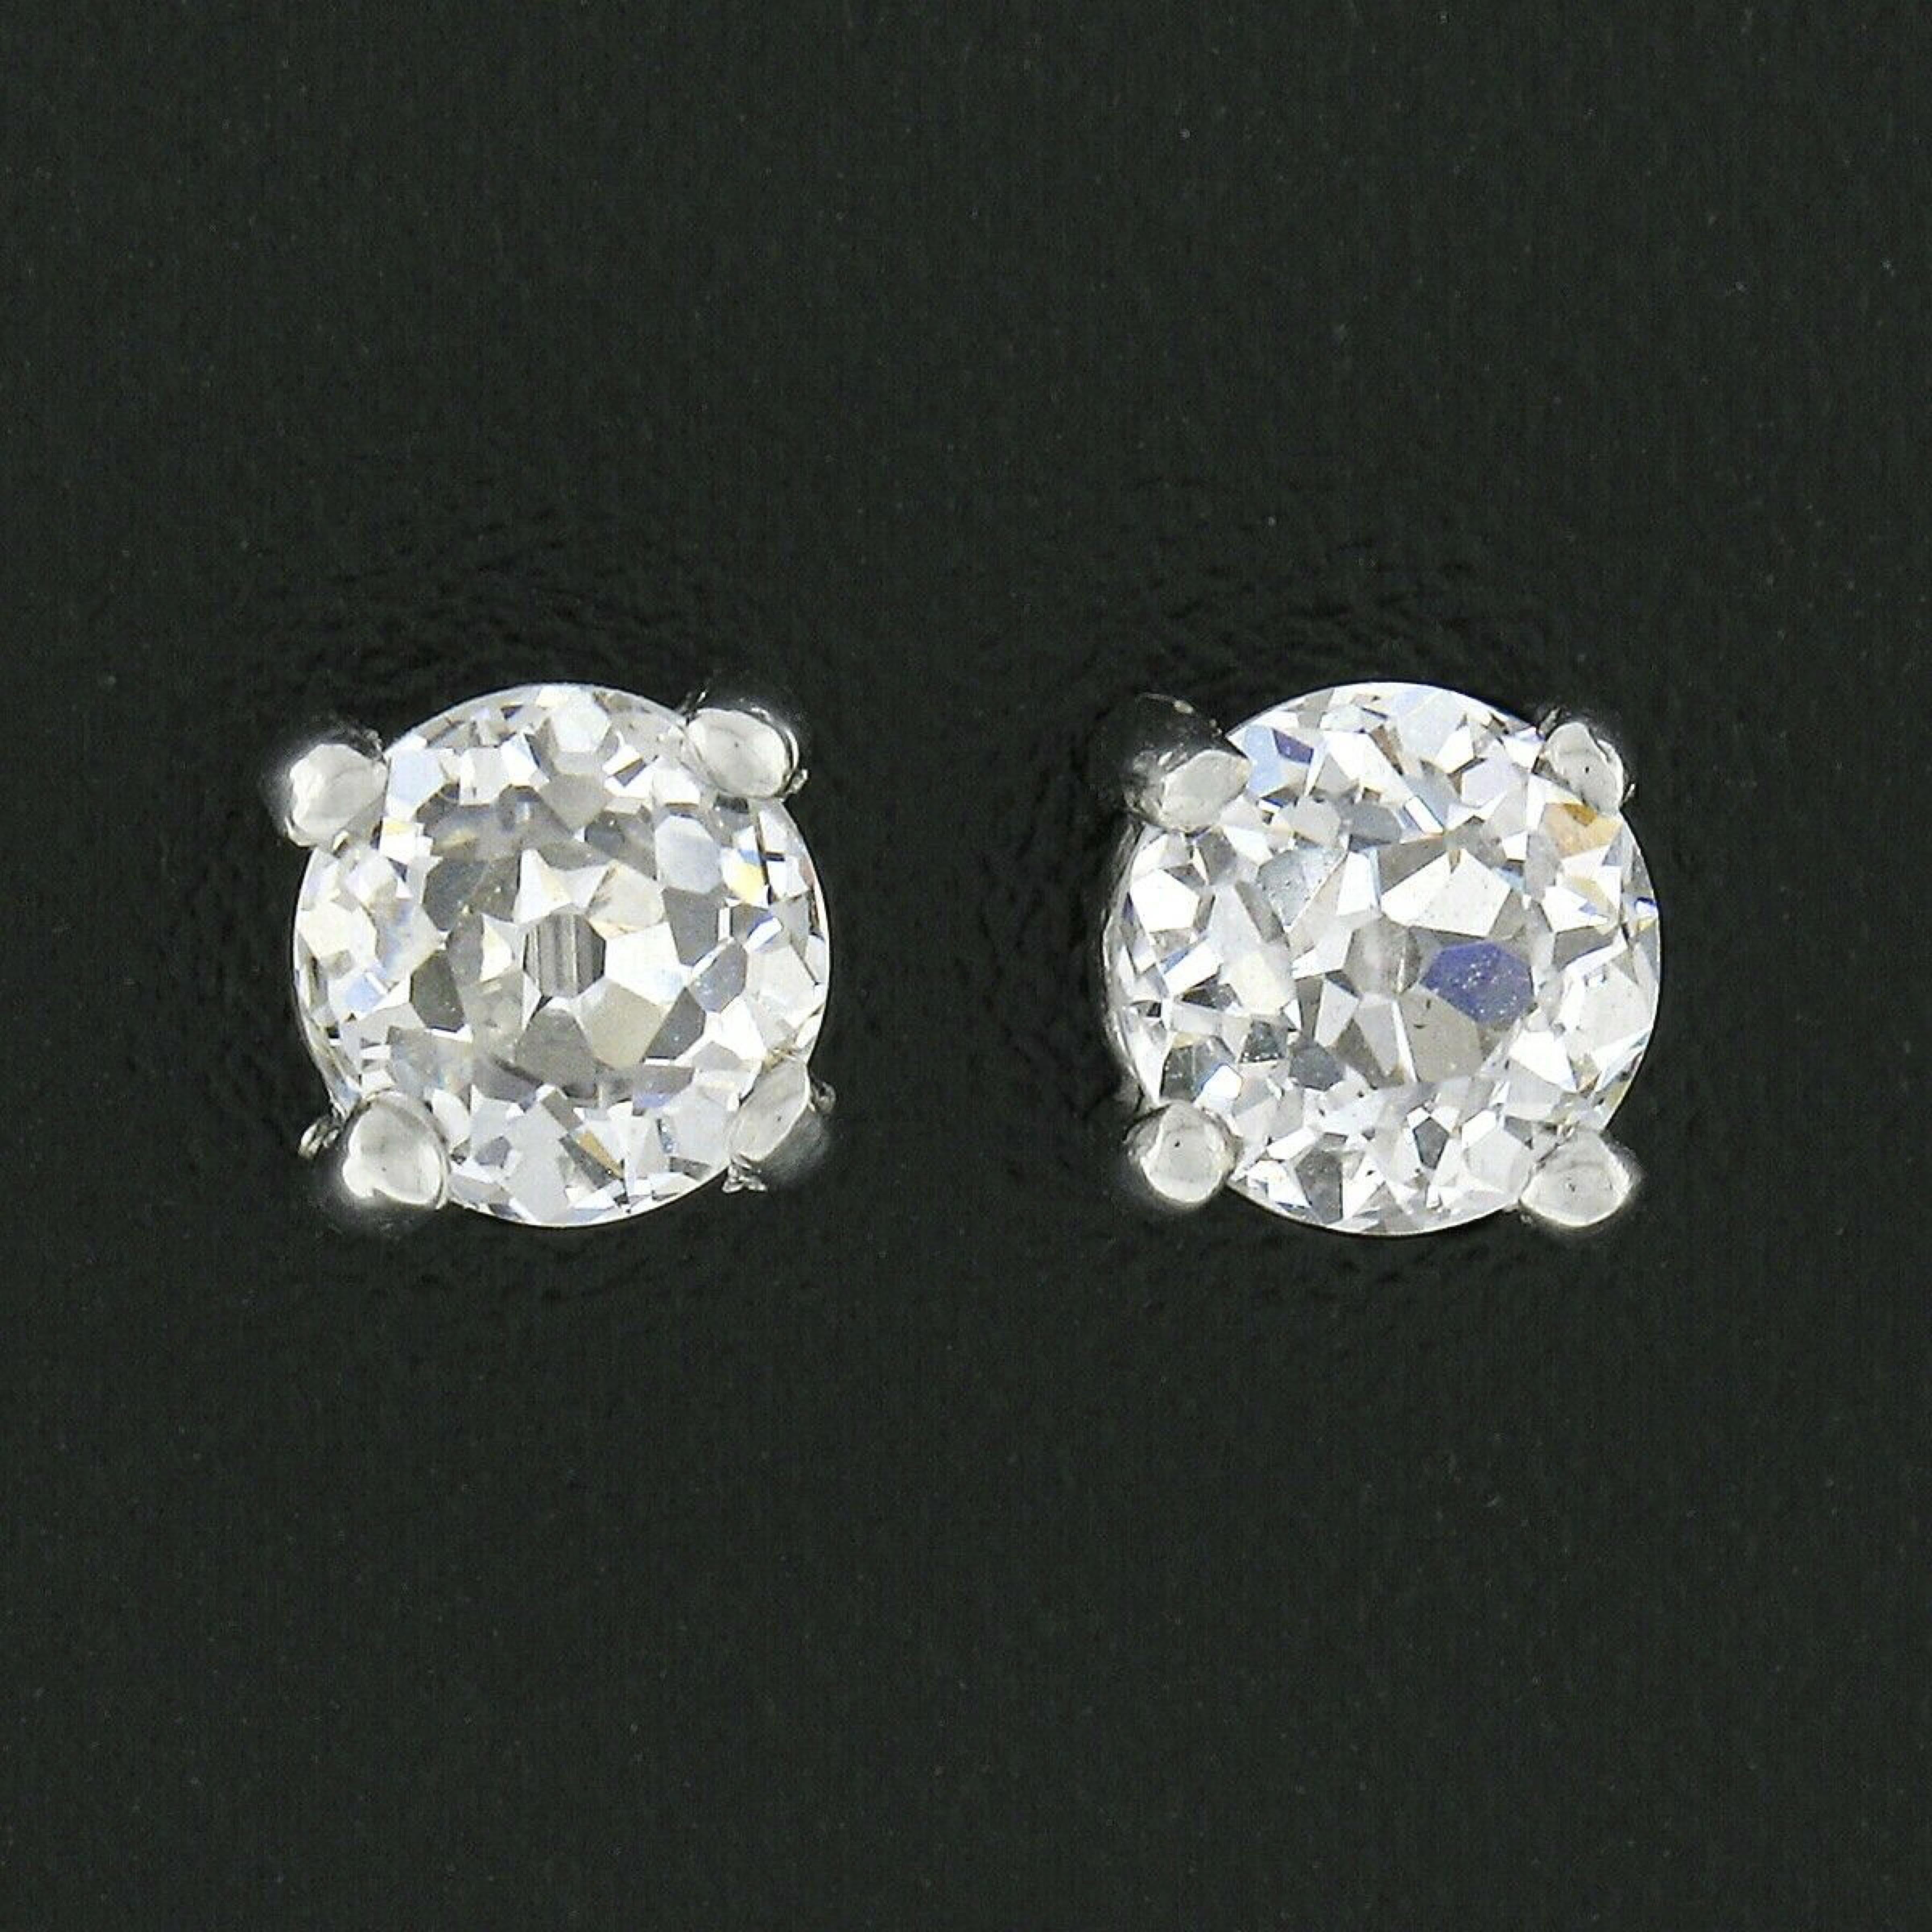 Here we have an outstanding pair of classically styled diamond stud earrings. They feature a pair of genuine, antique, diamonds that are each GIA certified with an old European cut, weighing a total of exactly 1 carat in weight, and are